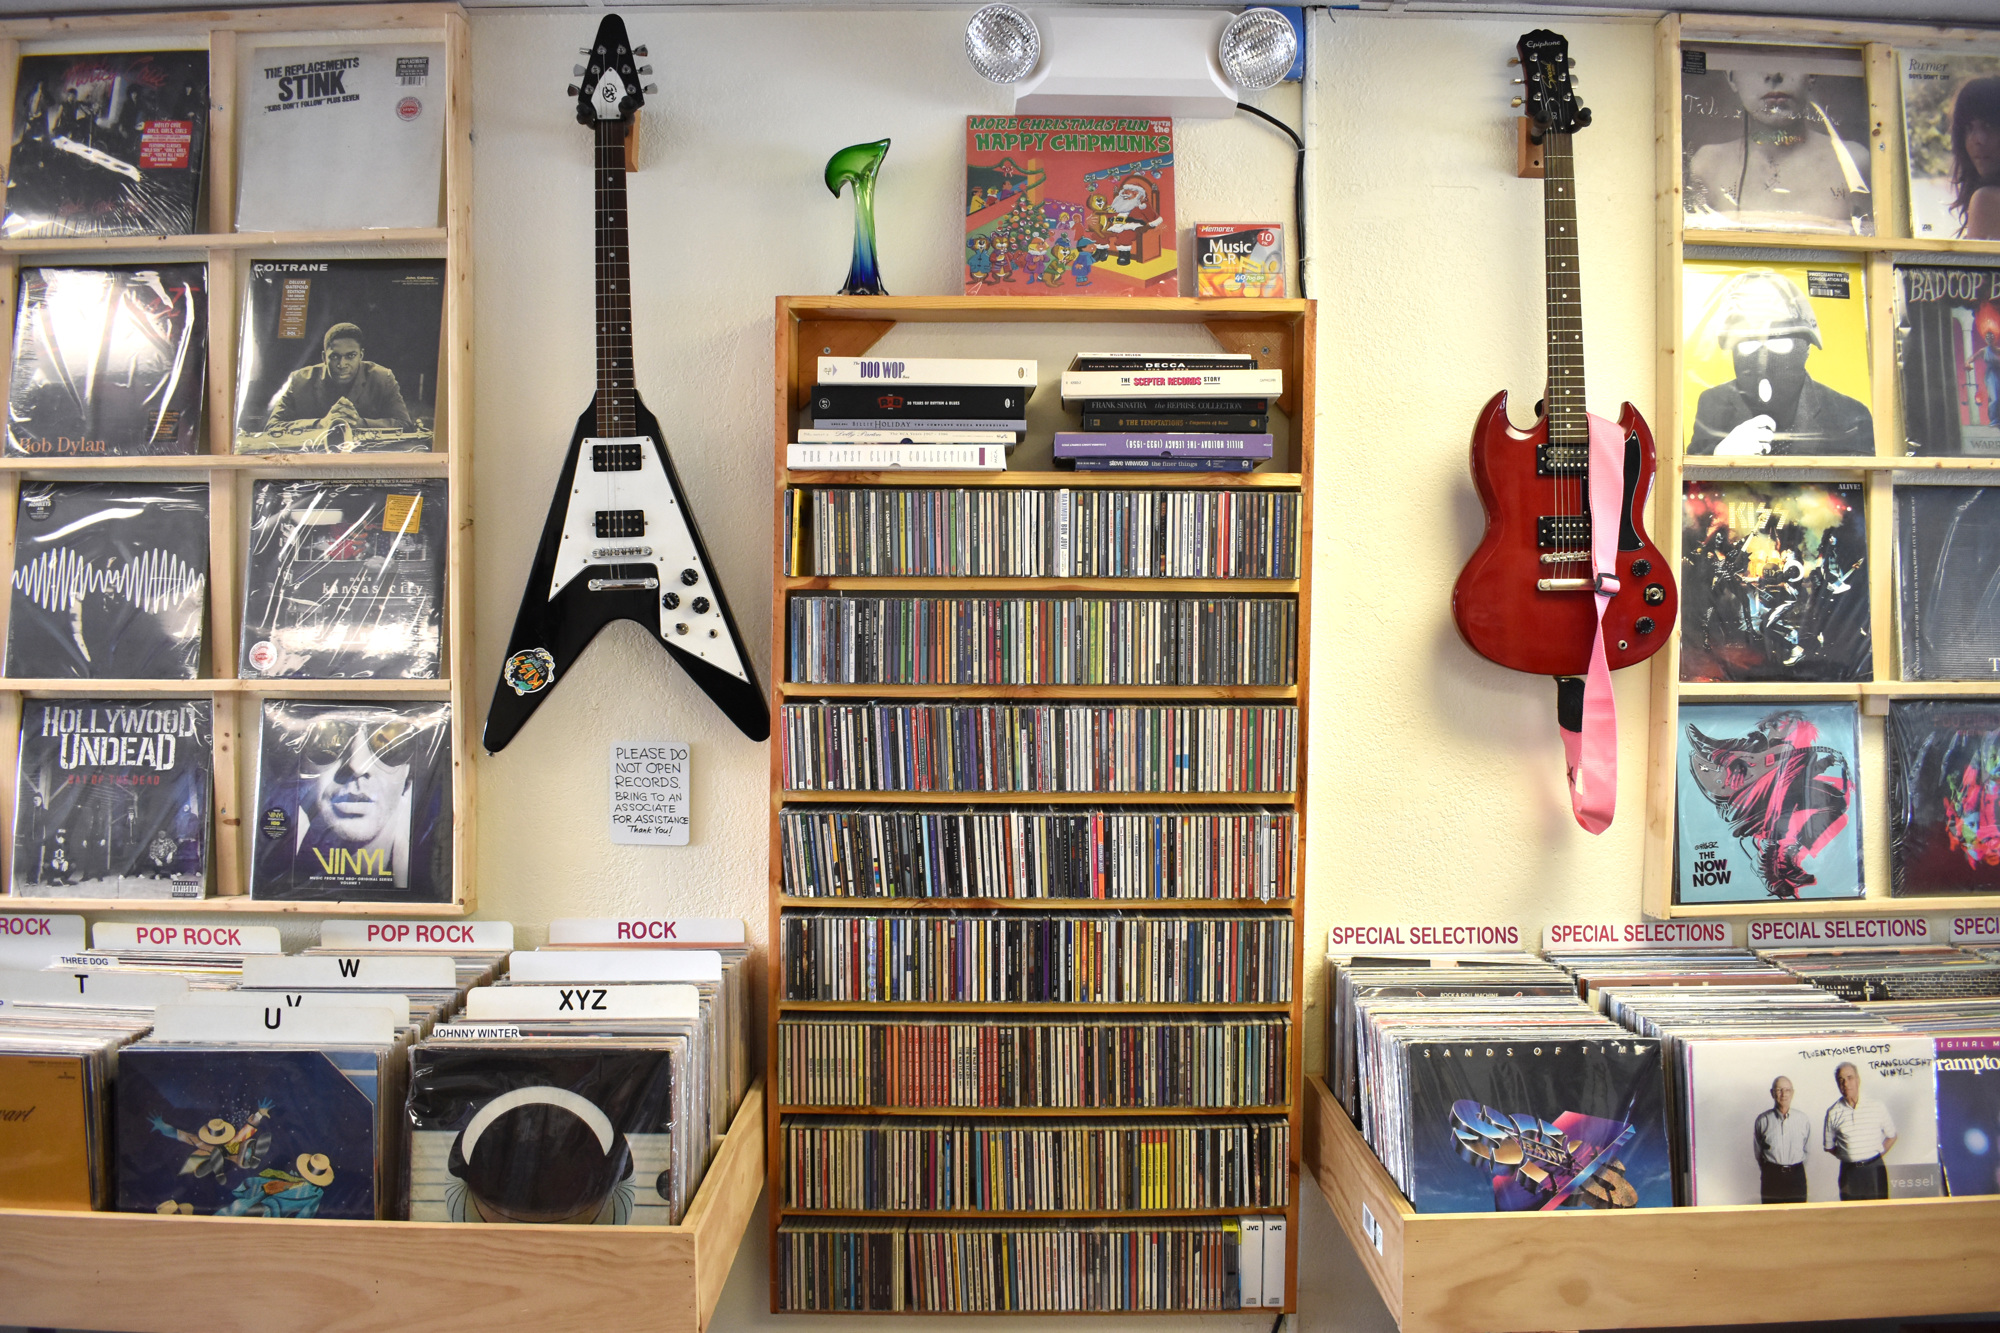 RocketStar Records sells CDs and cassettes along with records. Photo by Niki Kottmann